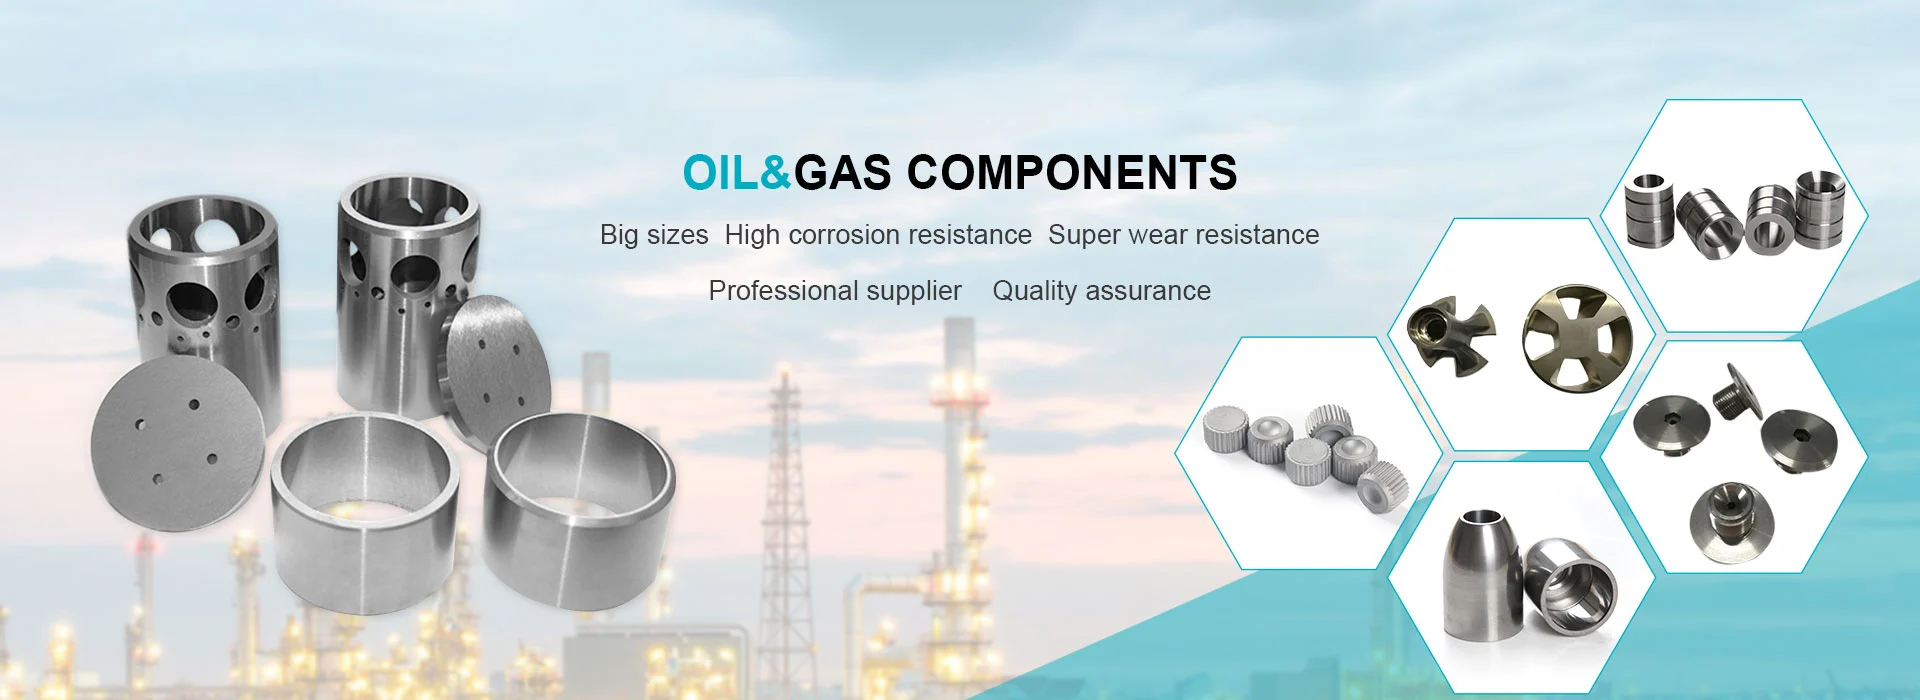 Oil&Gas Components